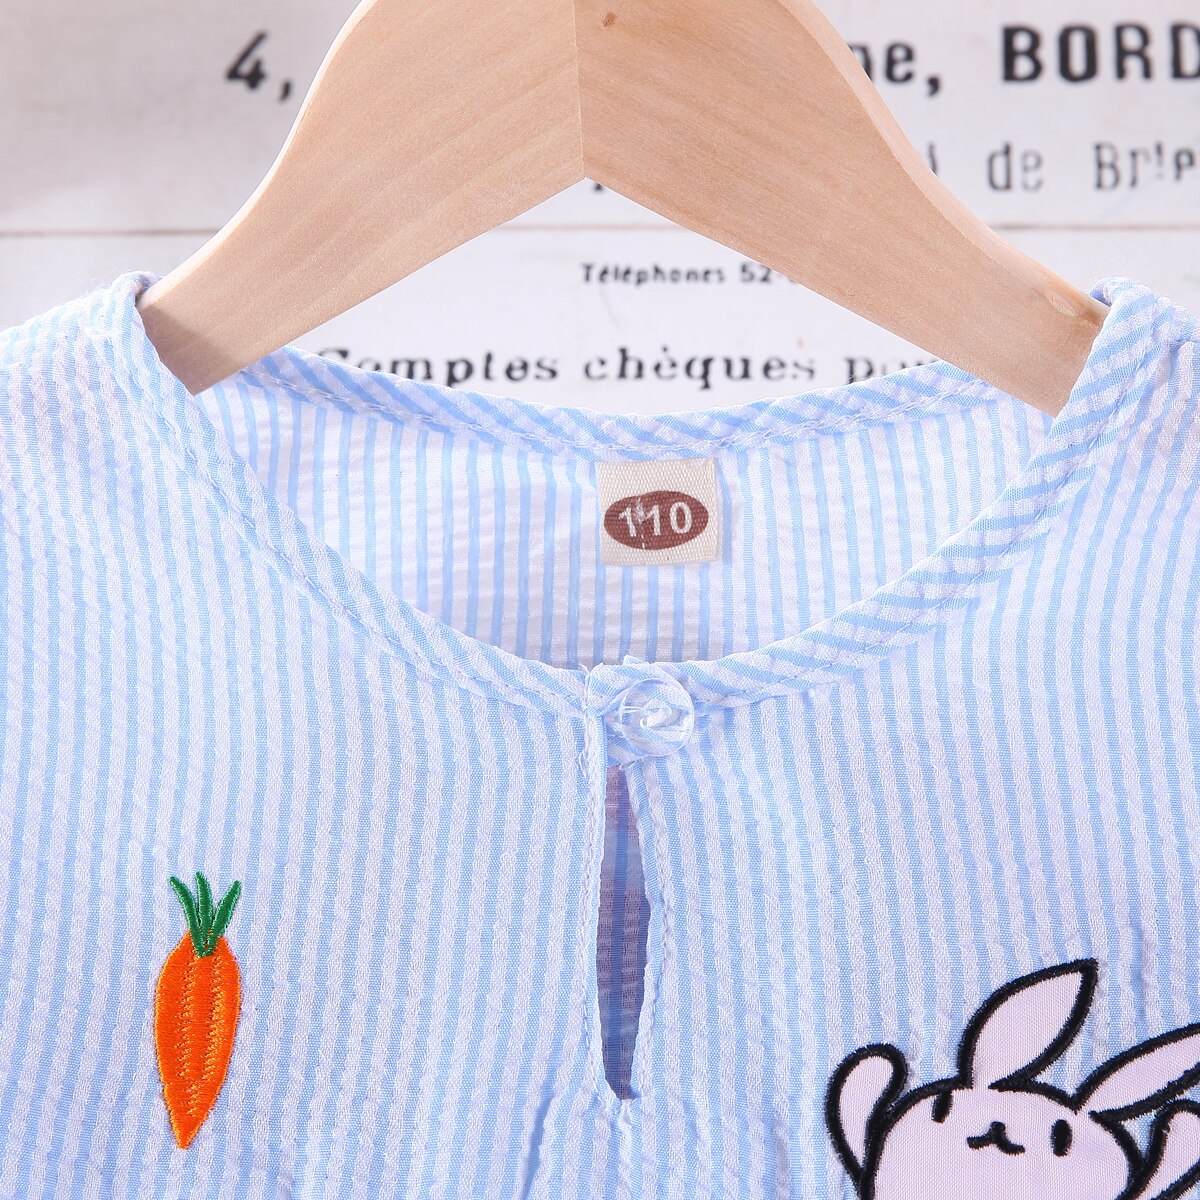 Girls Long-sleeved Cartoon Bunny with Carrot Cotton Blouse - Blue, White.